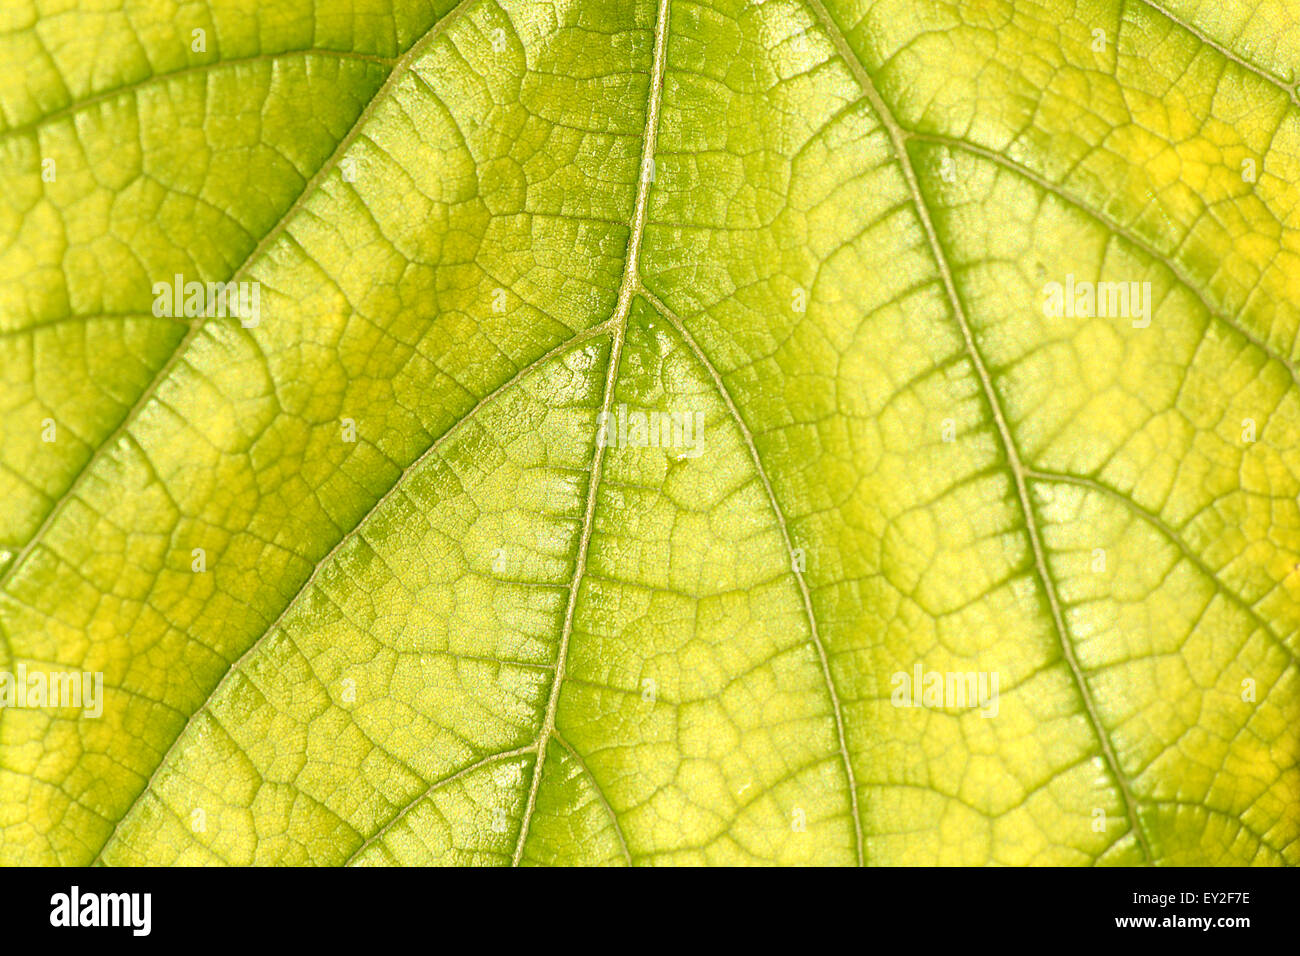 green leaf close up nature background Stock Photo